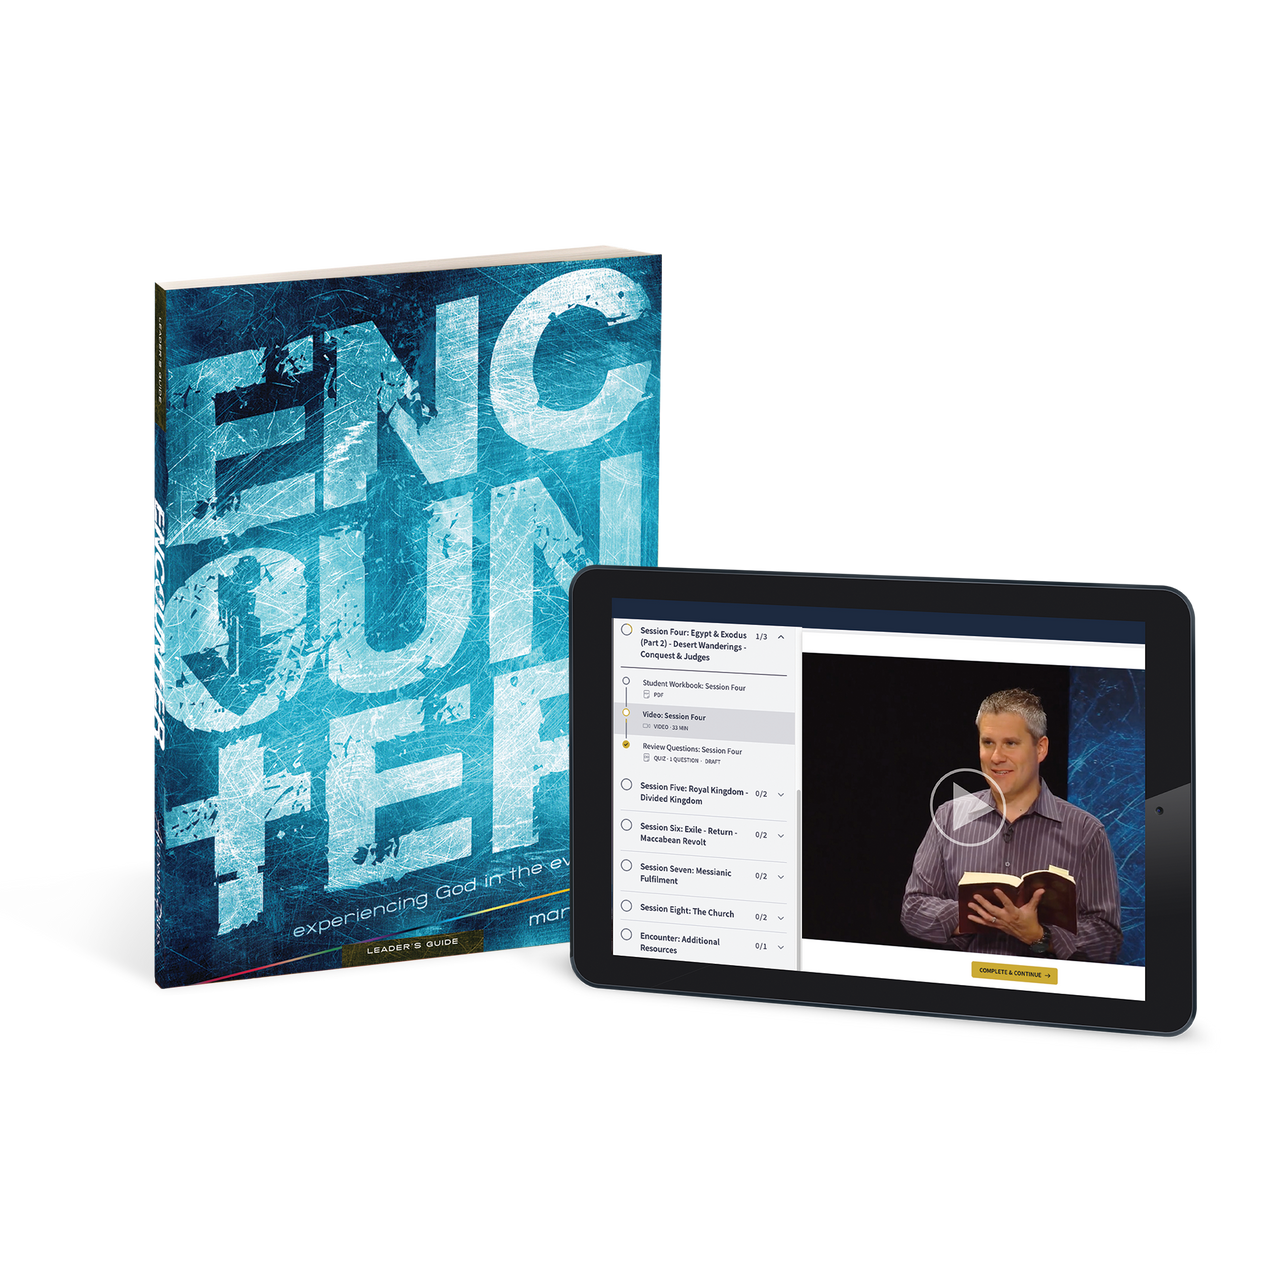 Encounter: Experiencing God in the Everyday, Leader’s Guide